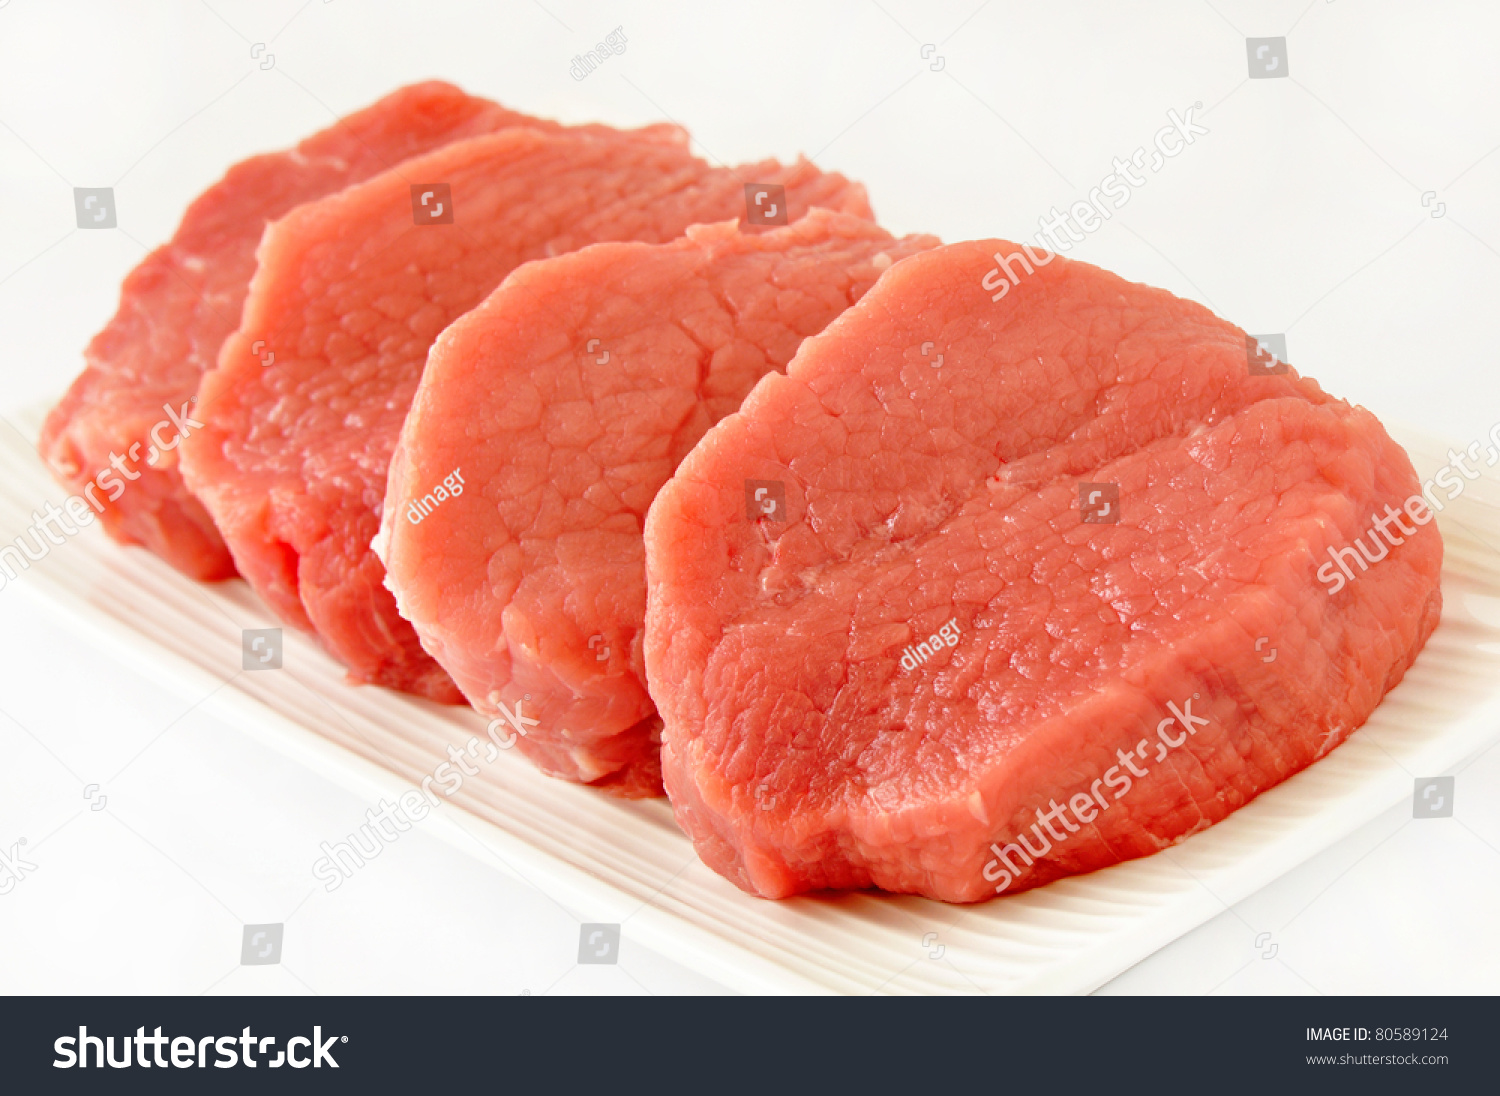 Chunks Of Beef Meat Isolated On White Background Stock Photo 80589124 ...